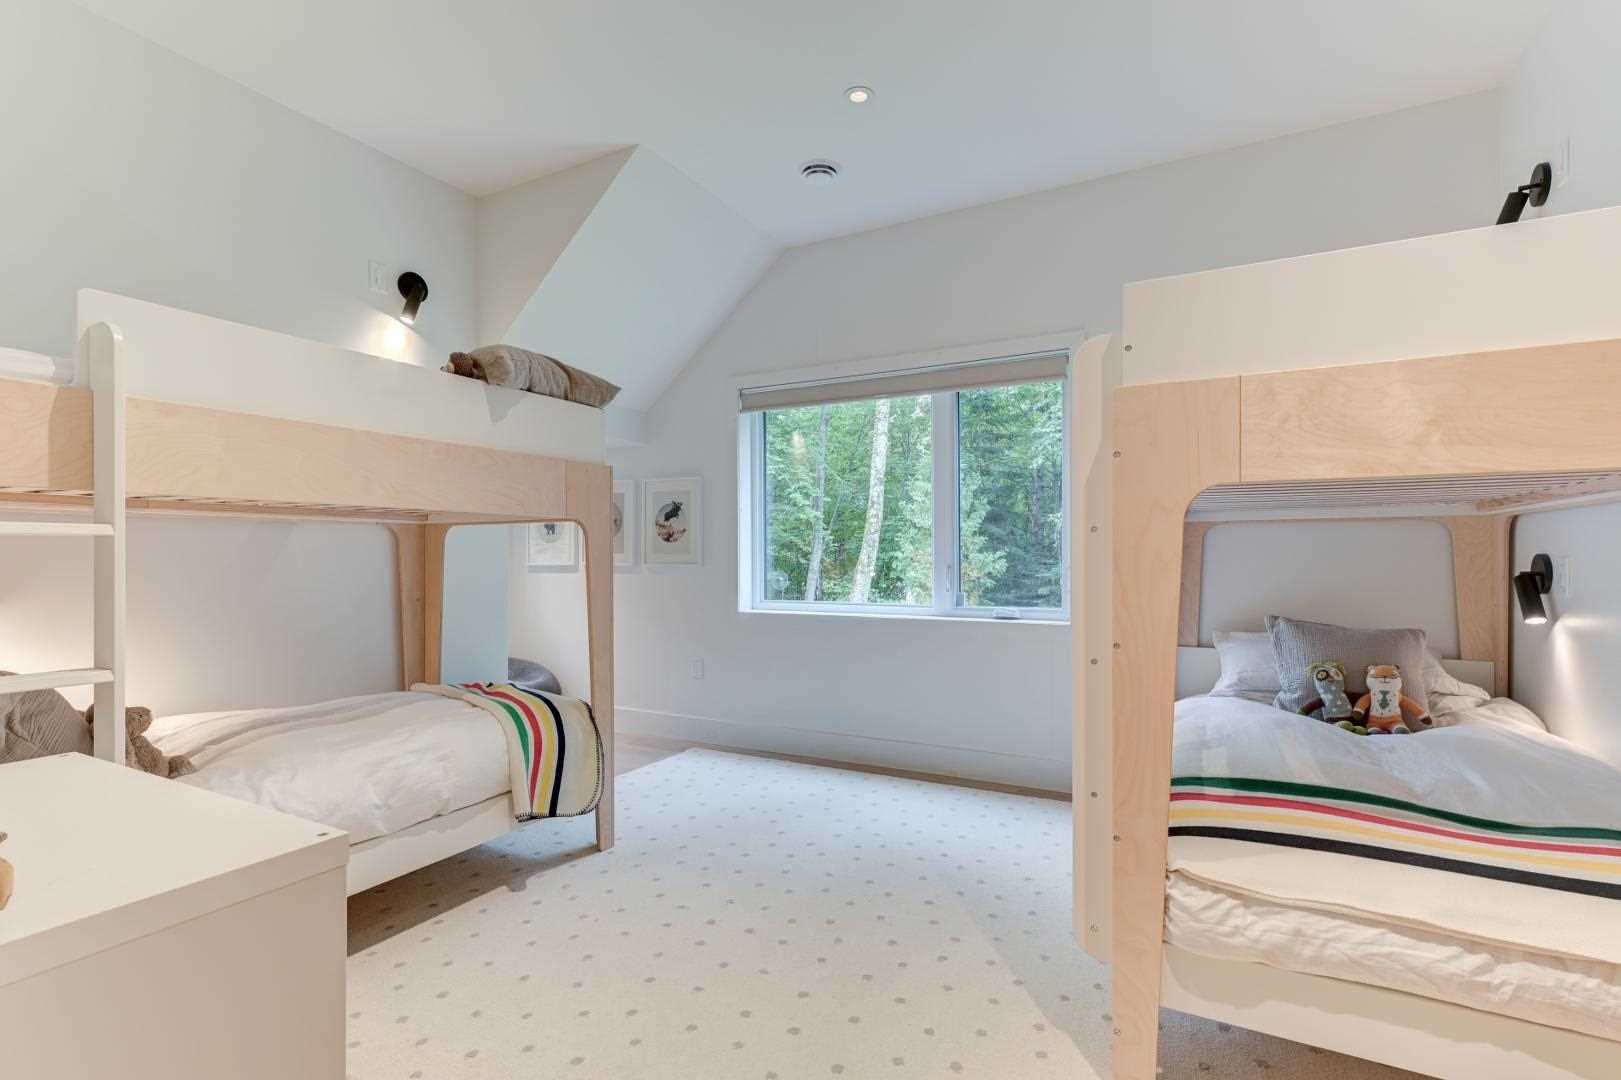 In this bedroom, two sets of bunk beds creates room for four to sleep. Each of the bunk beds also has their own sconce.